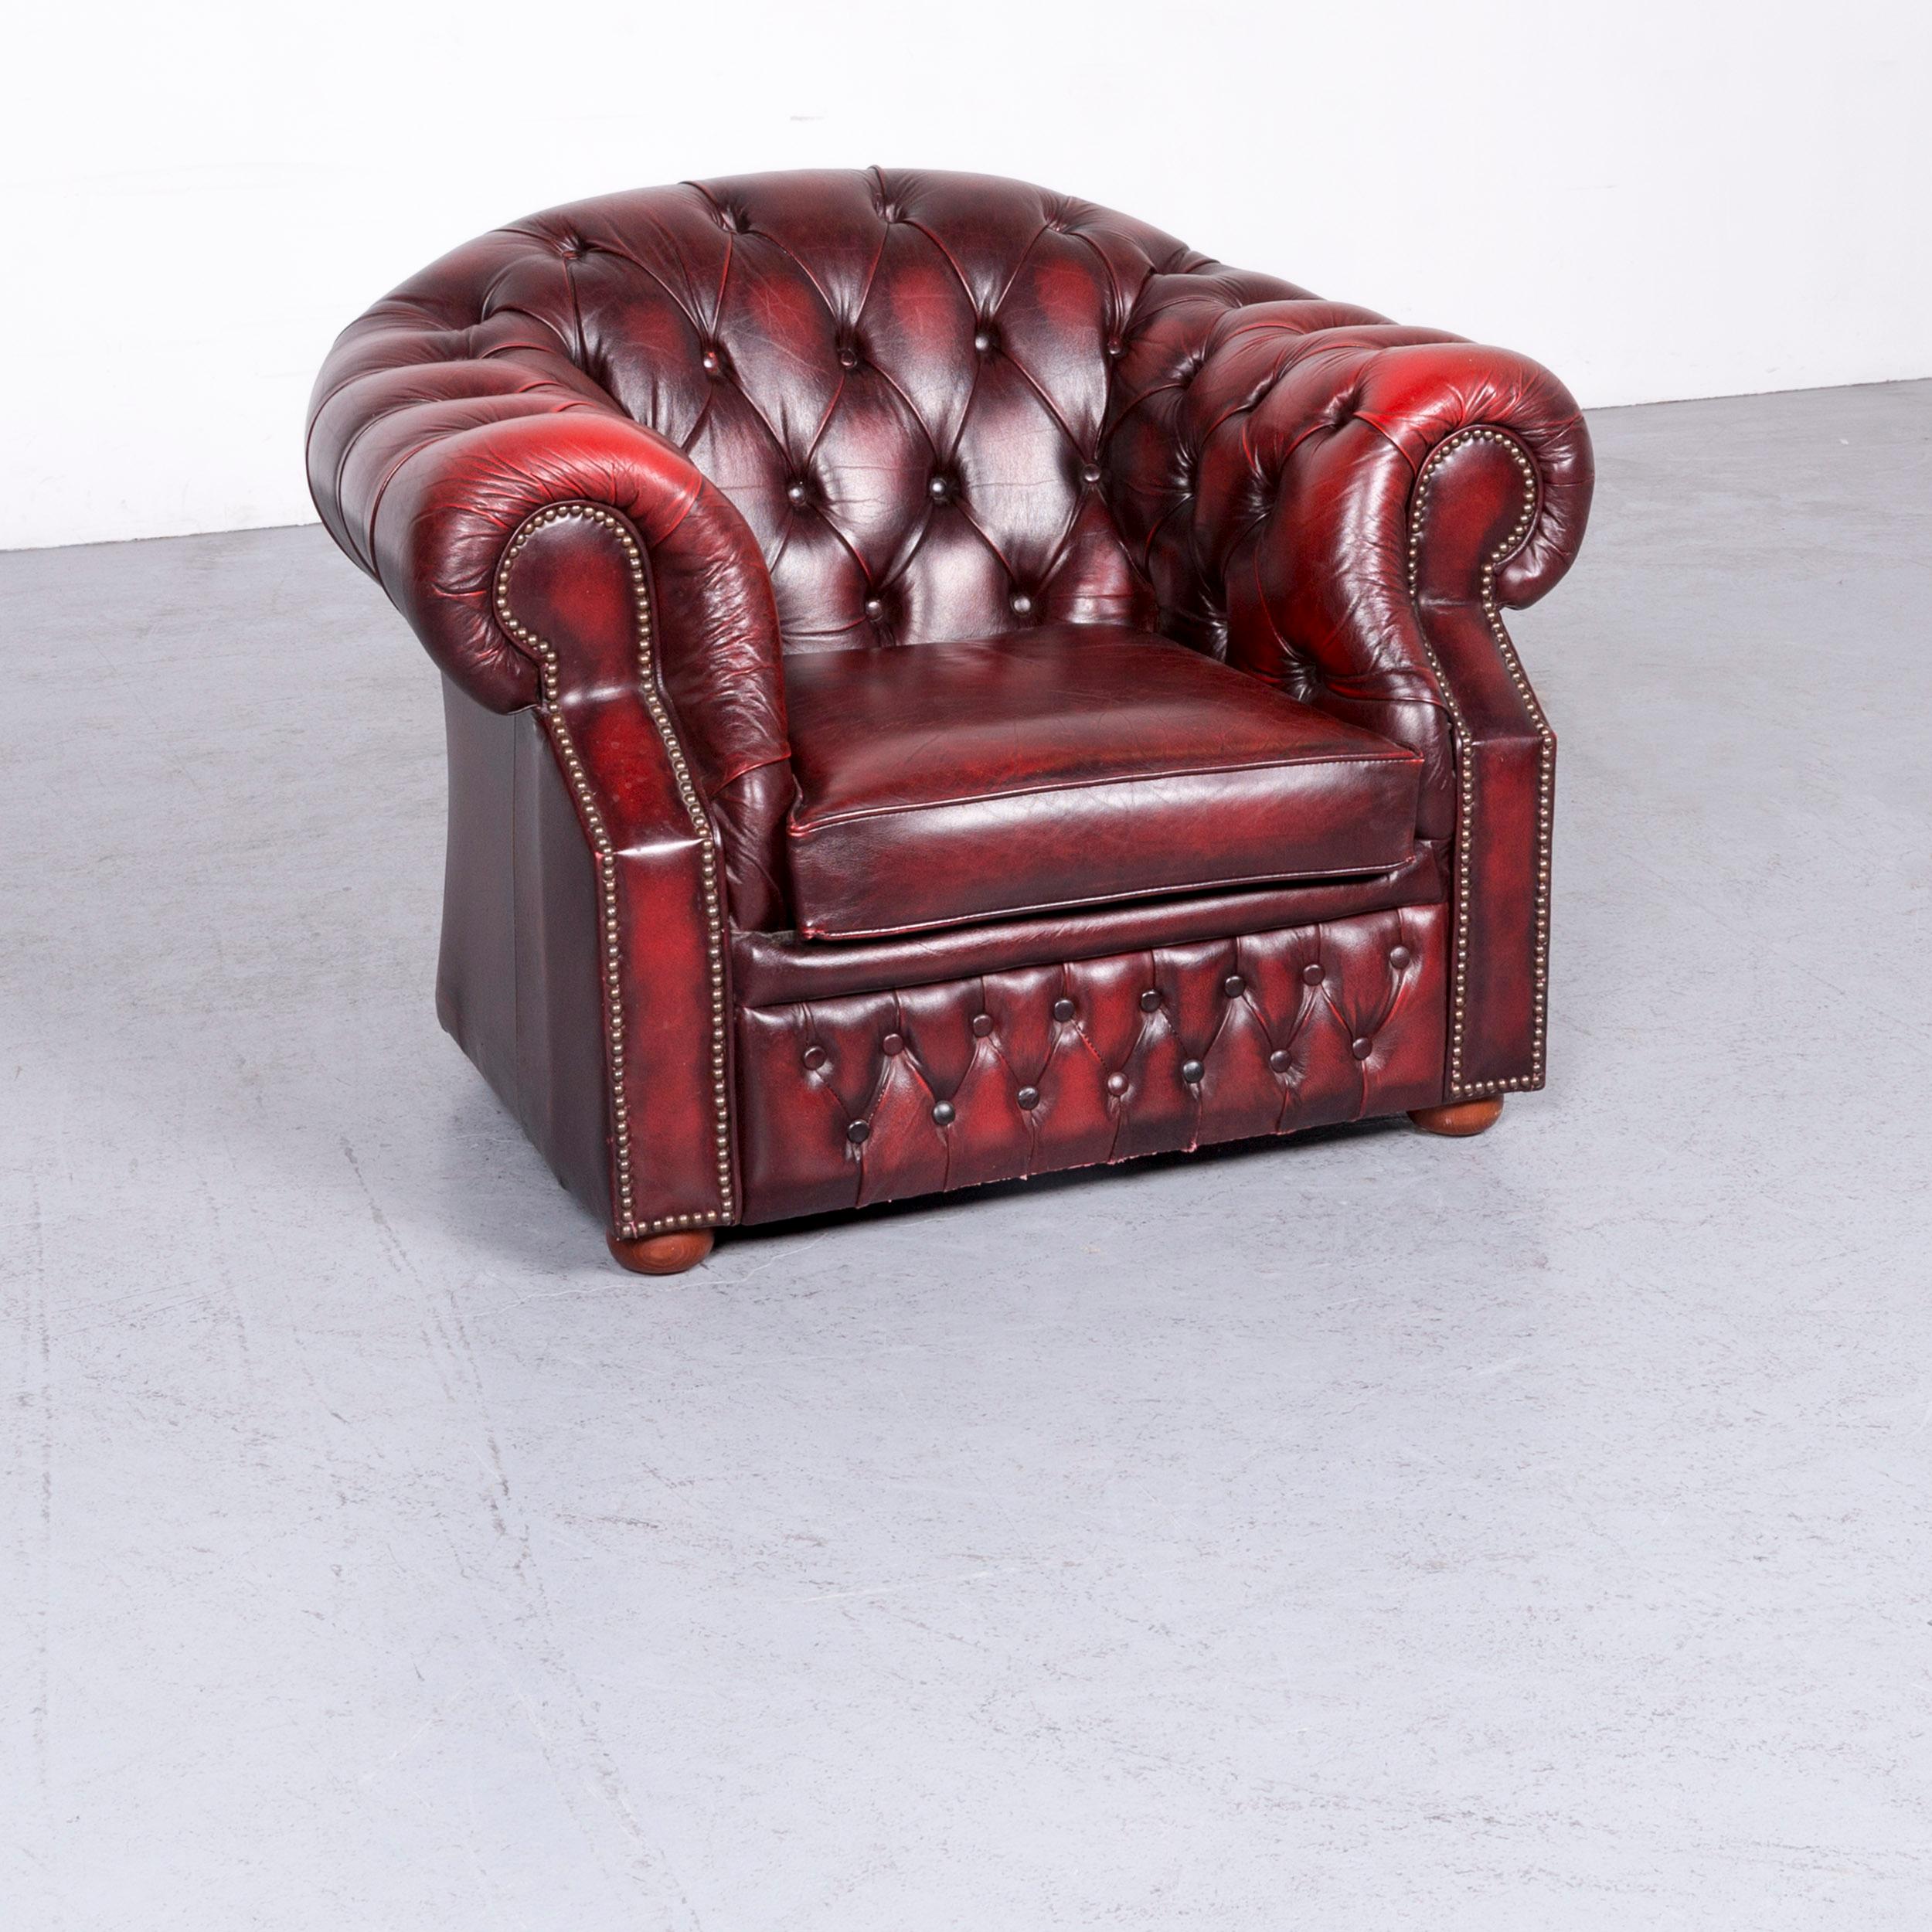 Chesterfield Centurion Leather Sofa Armchair Set Red Two-Seat Vintage Couch 5